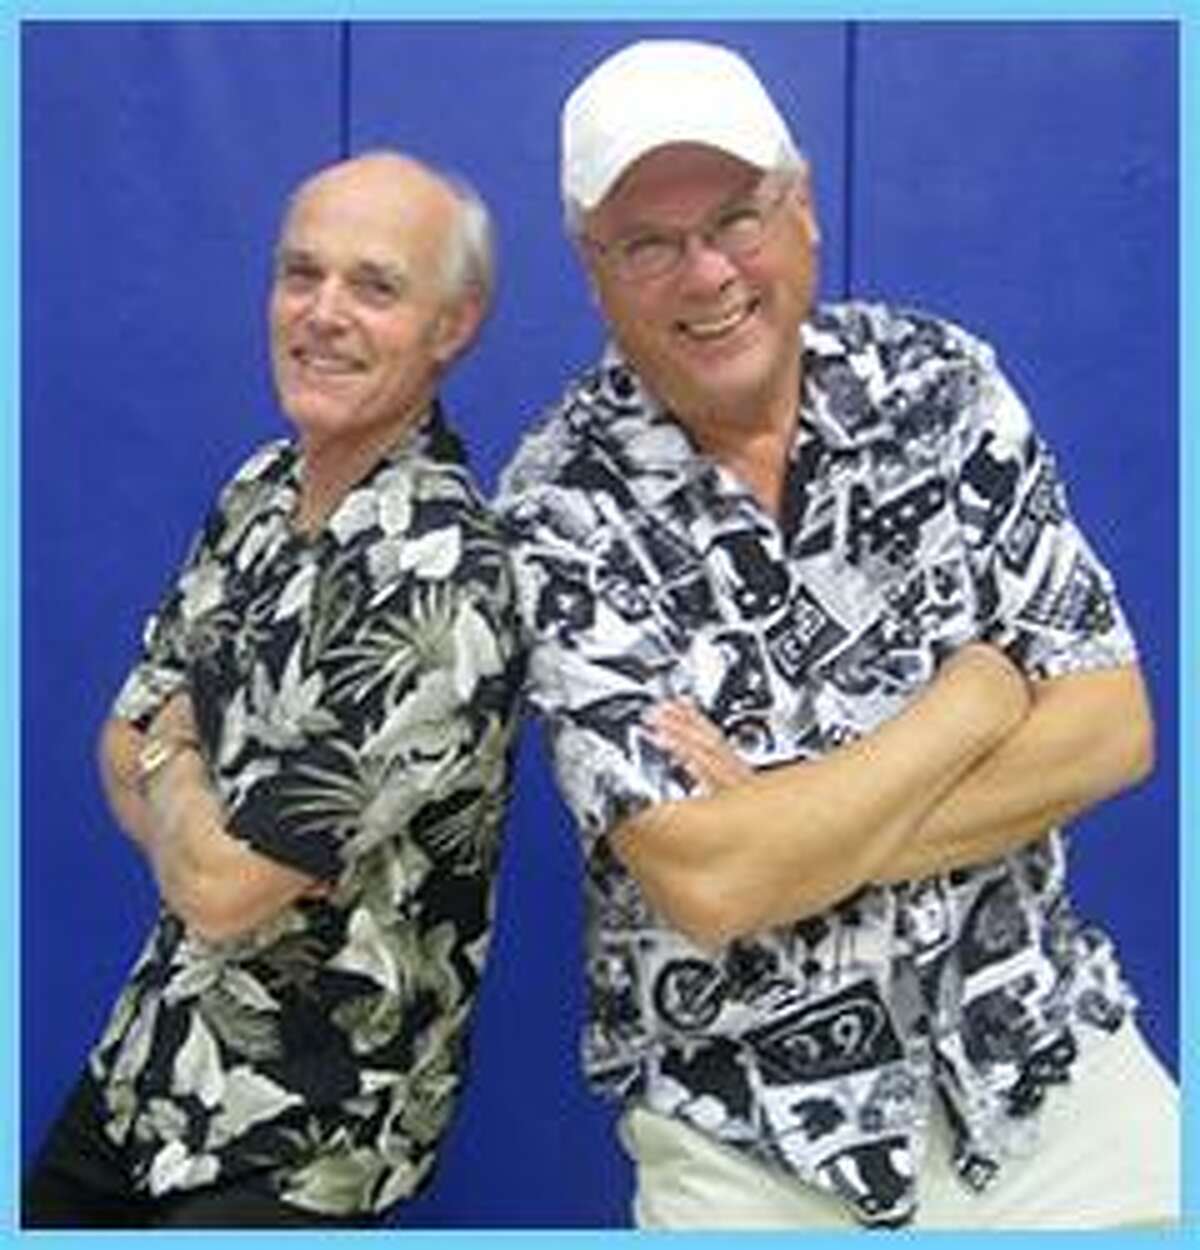 The Plumb Memorial and Huntington Branch Libraries will be celebrating summer reading with a performance from musicians Brian Gillie and Tom “T-Bone” Stankus — also known as “the Elderly Brothers” - on Aug. 5, 2022.